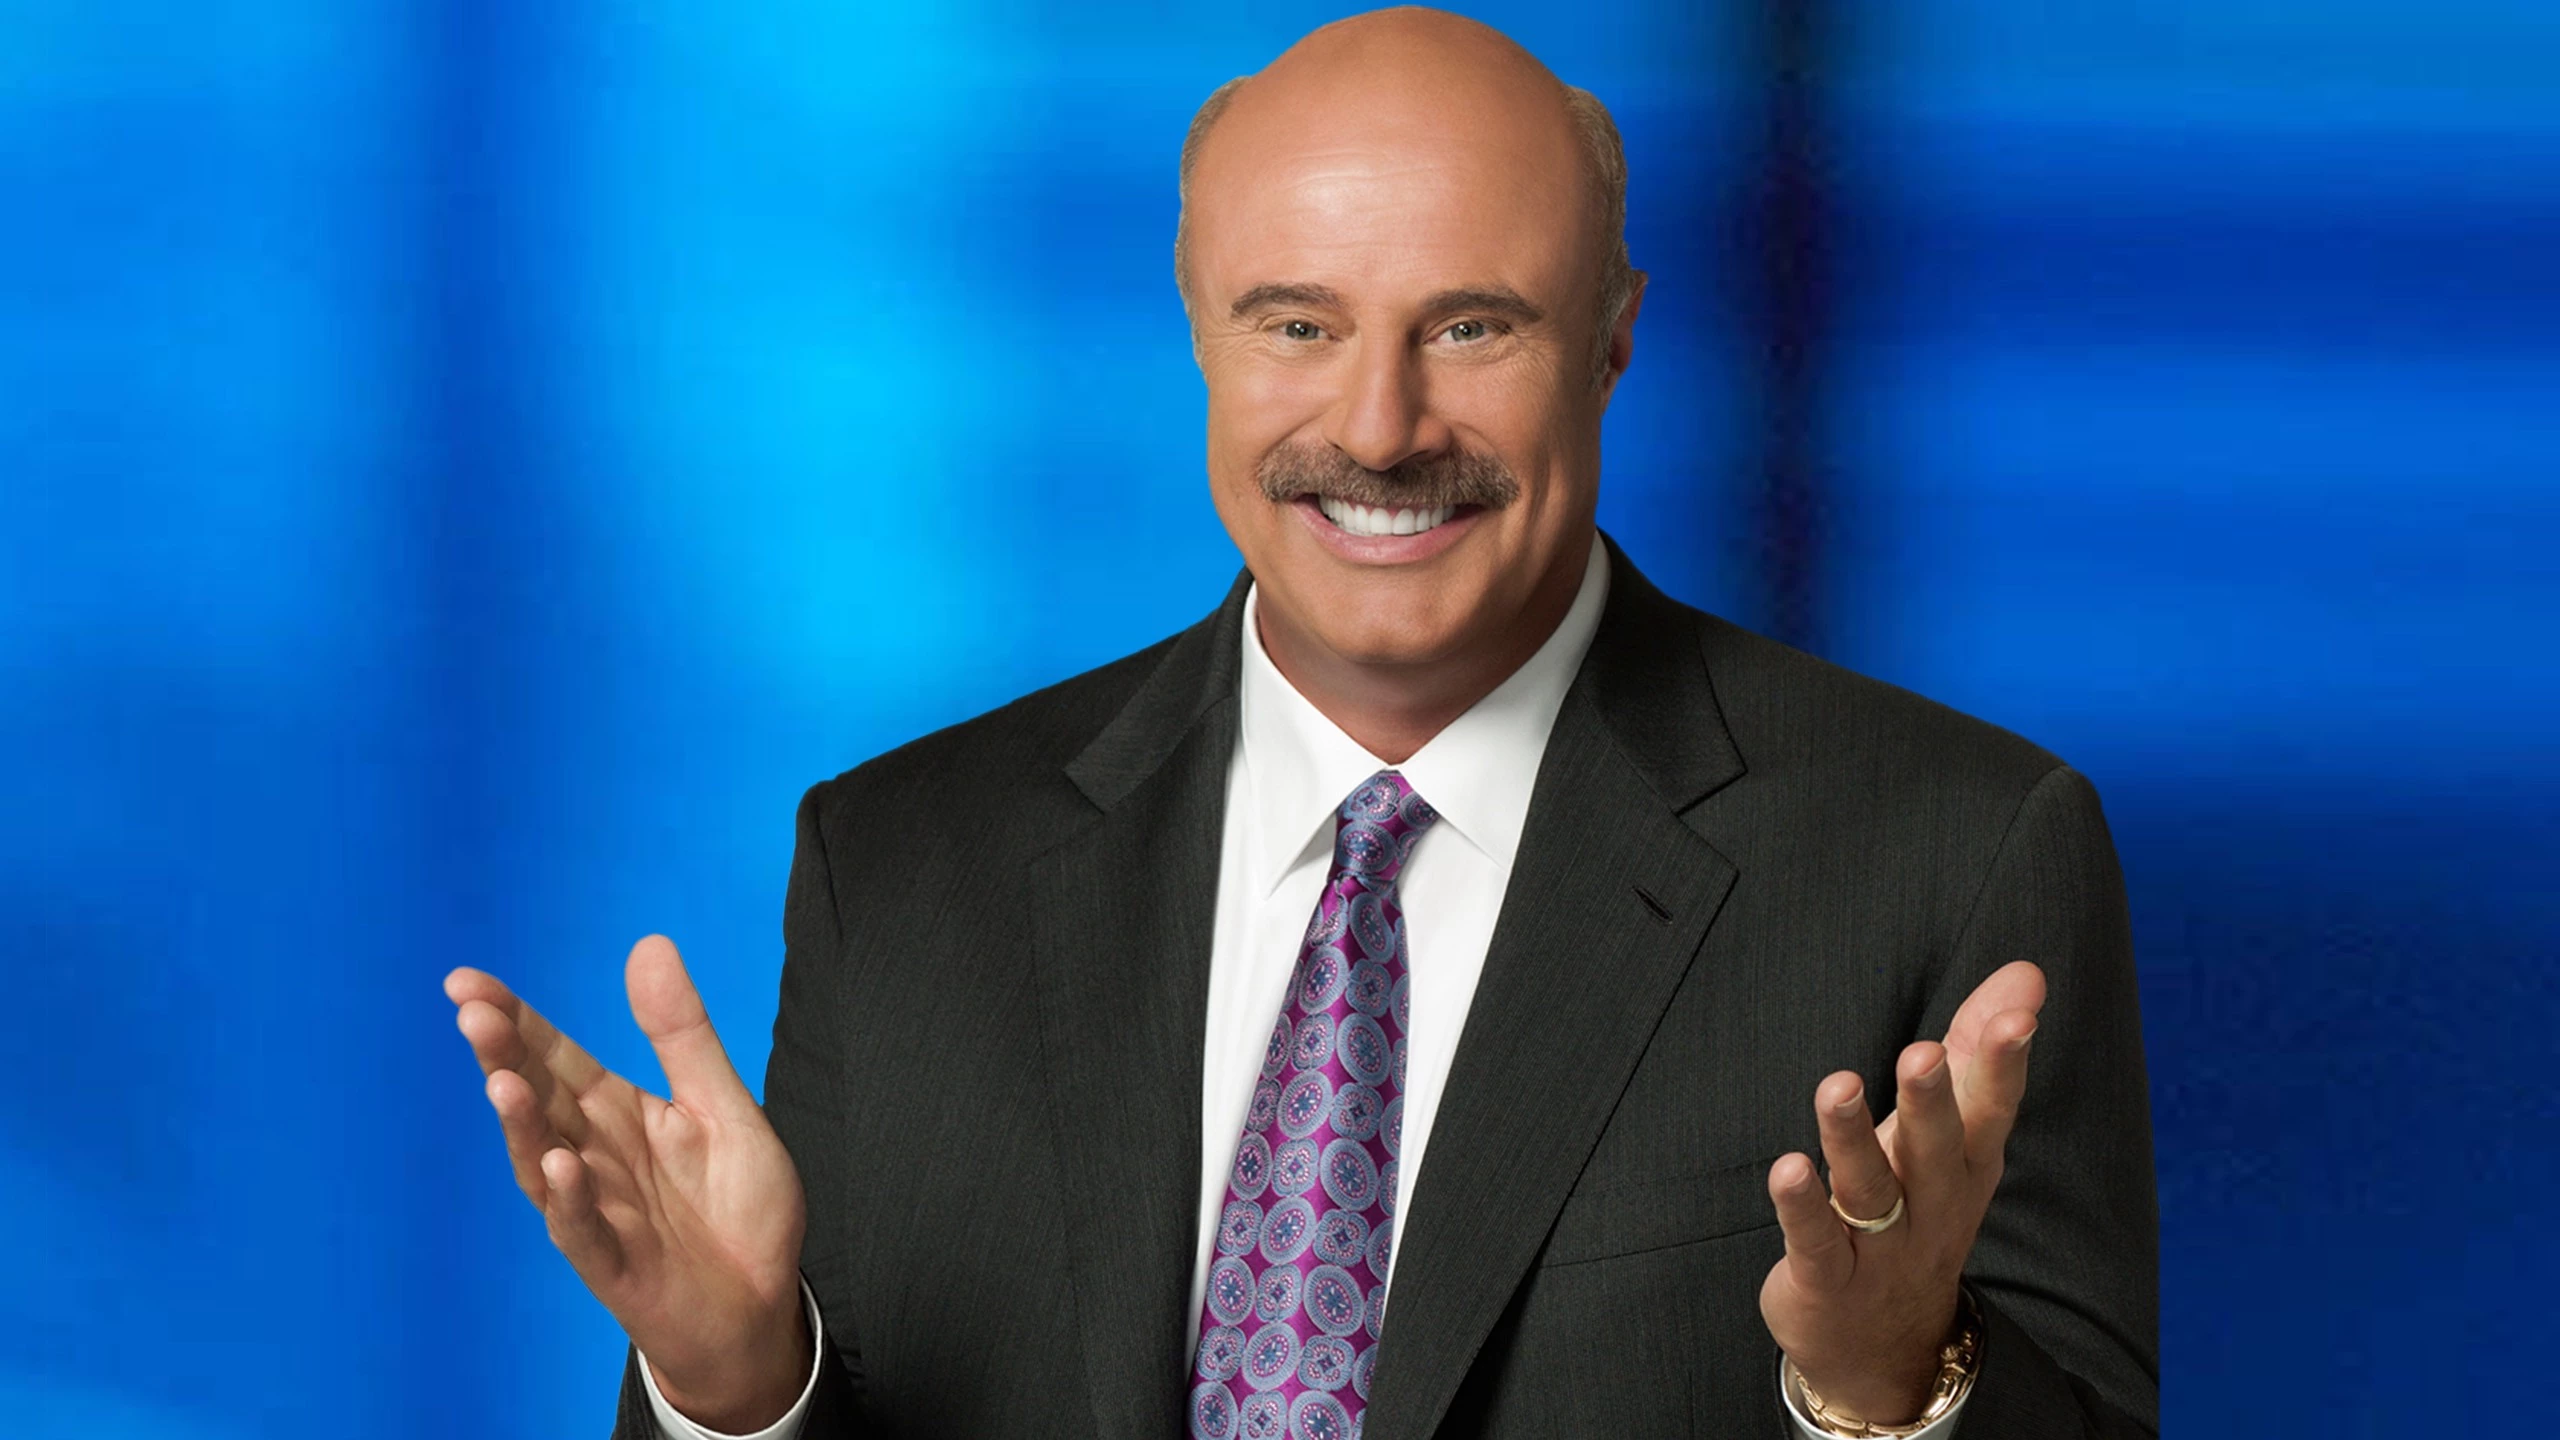 Is Dr. Phil a Real Doctor?